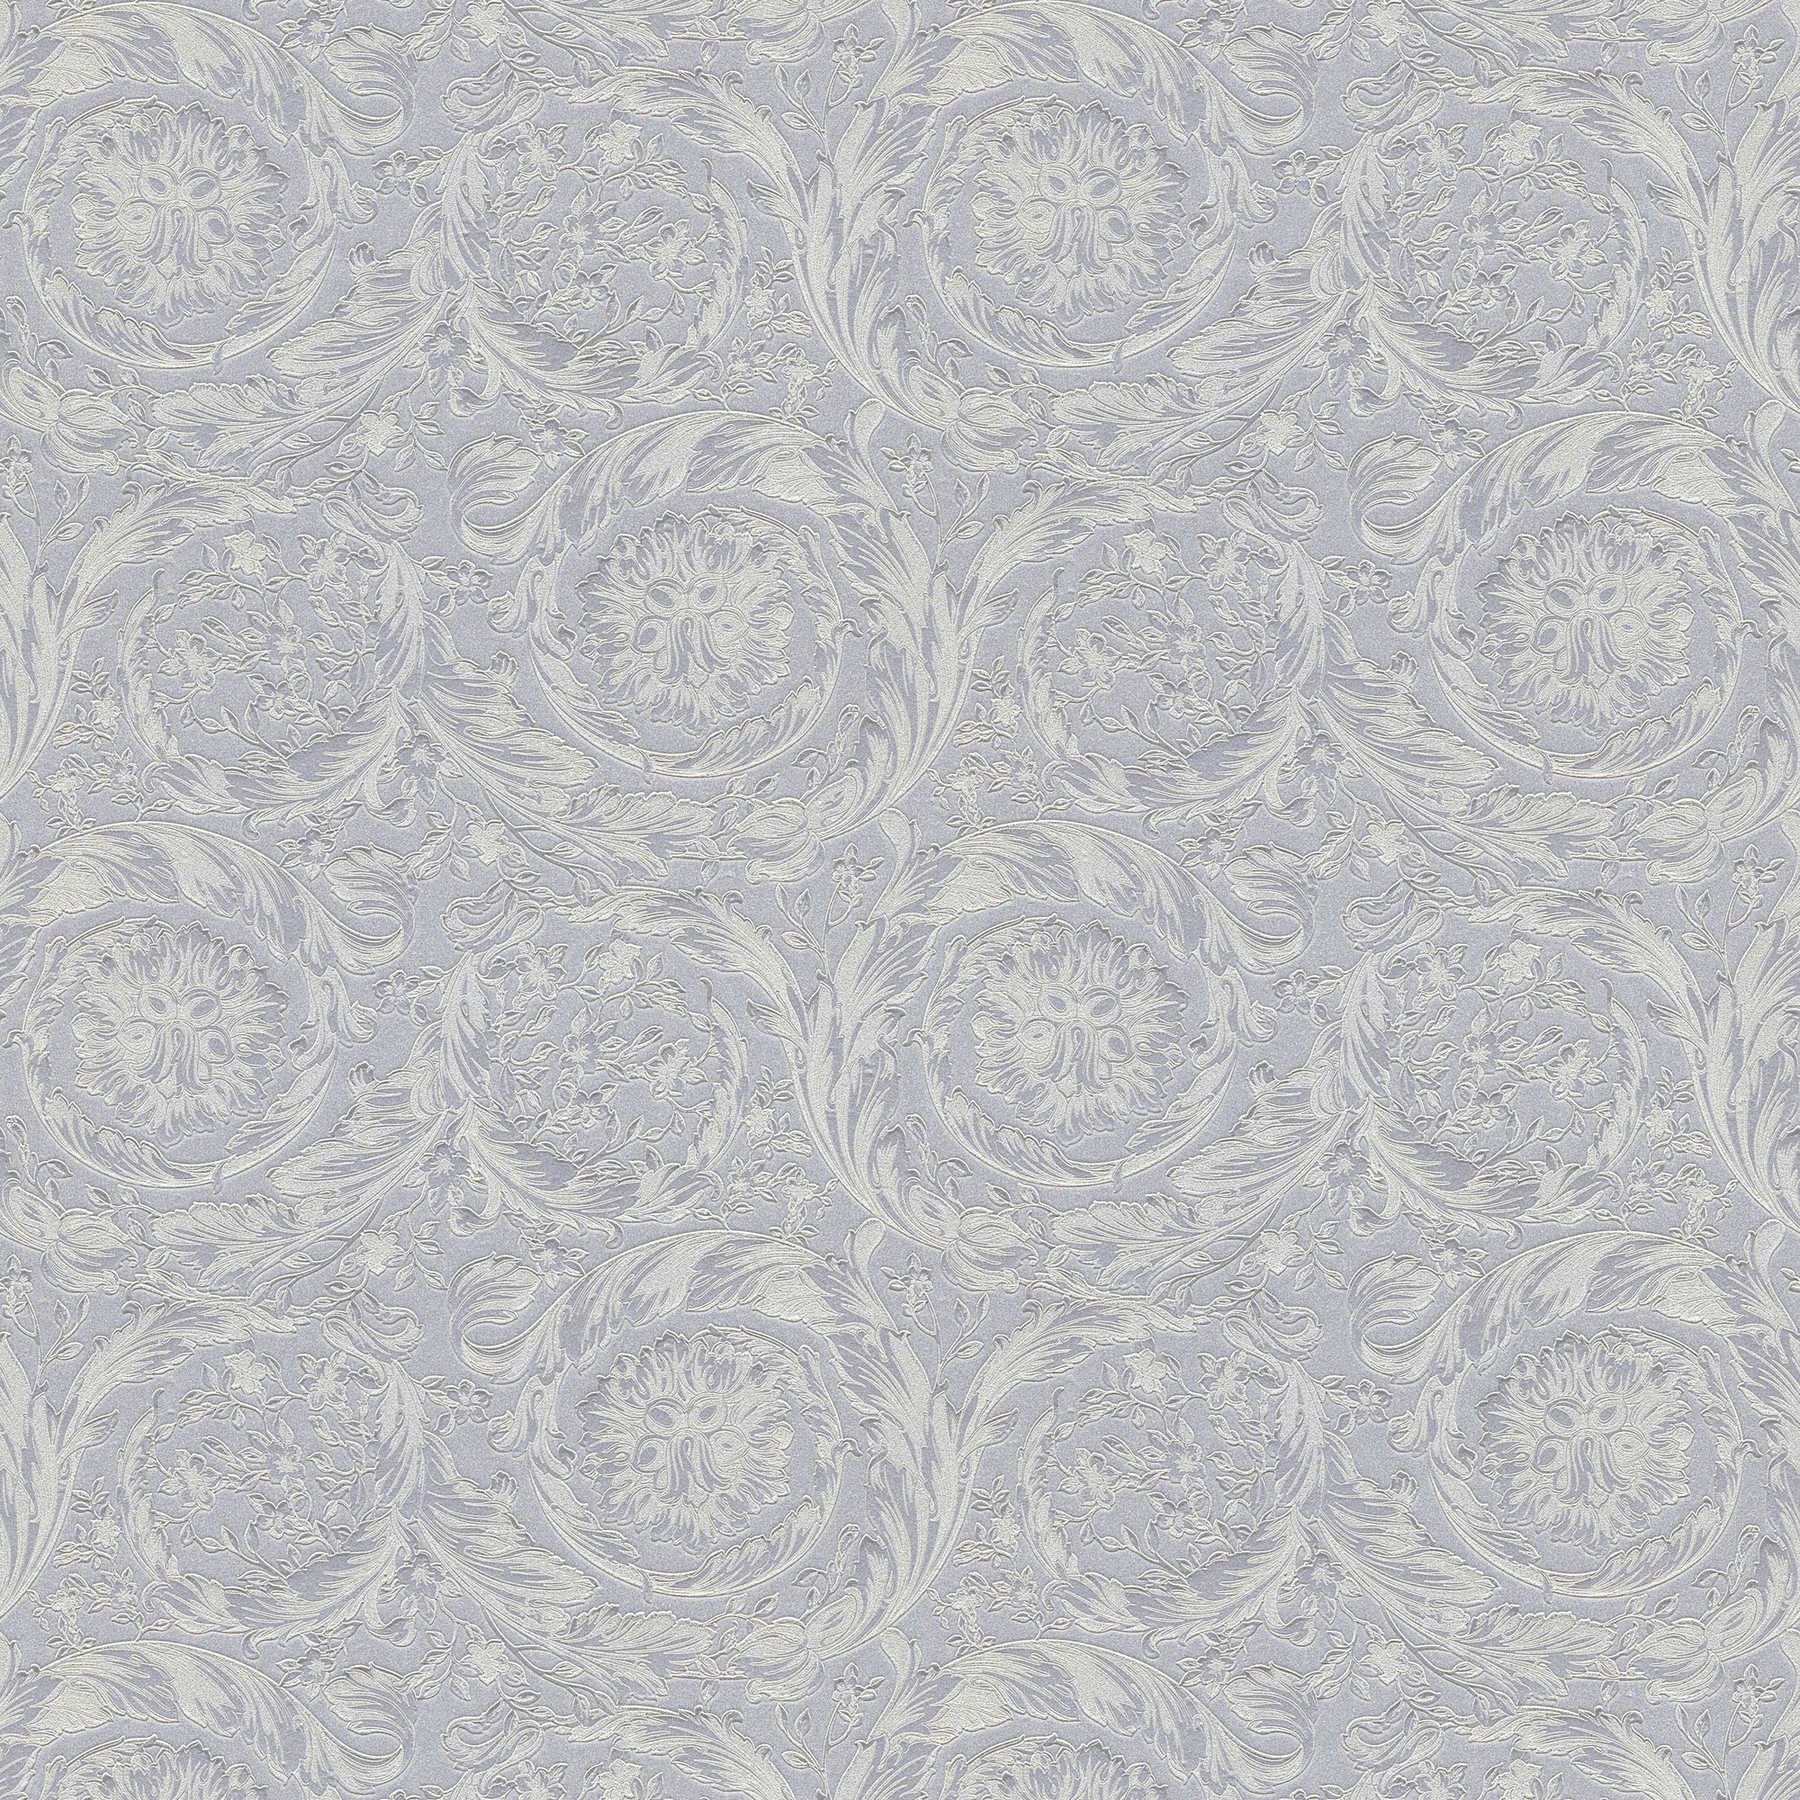 Silver VERSACE wallpaper shimmer effects - silver, grey
